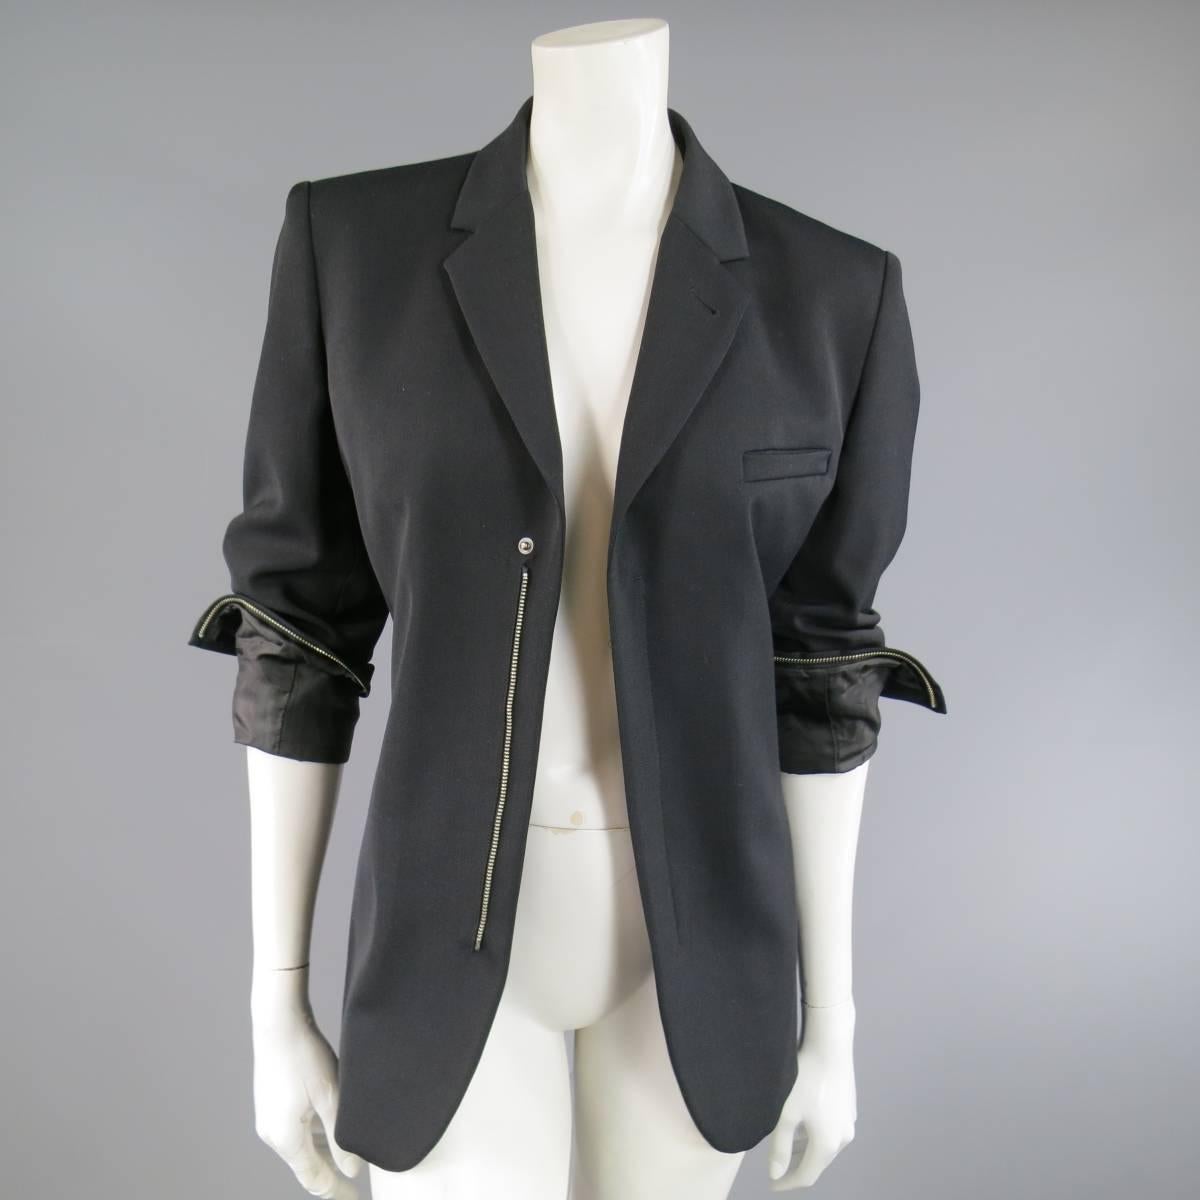 This Jean Paul Gaultier jacket comes in a wool blend twill with a notch lapel, hidden placket snap and zip closure, and internal zip hemmed slit cuffs. Made in Italy.
 
Excellent Pre-Owned Condition.
Marked: US 8
 
Measurements:
 
Shoulder: 16.5